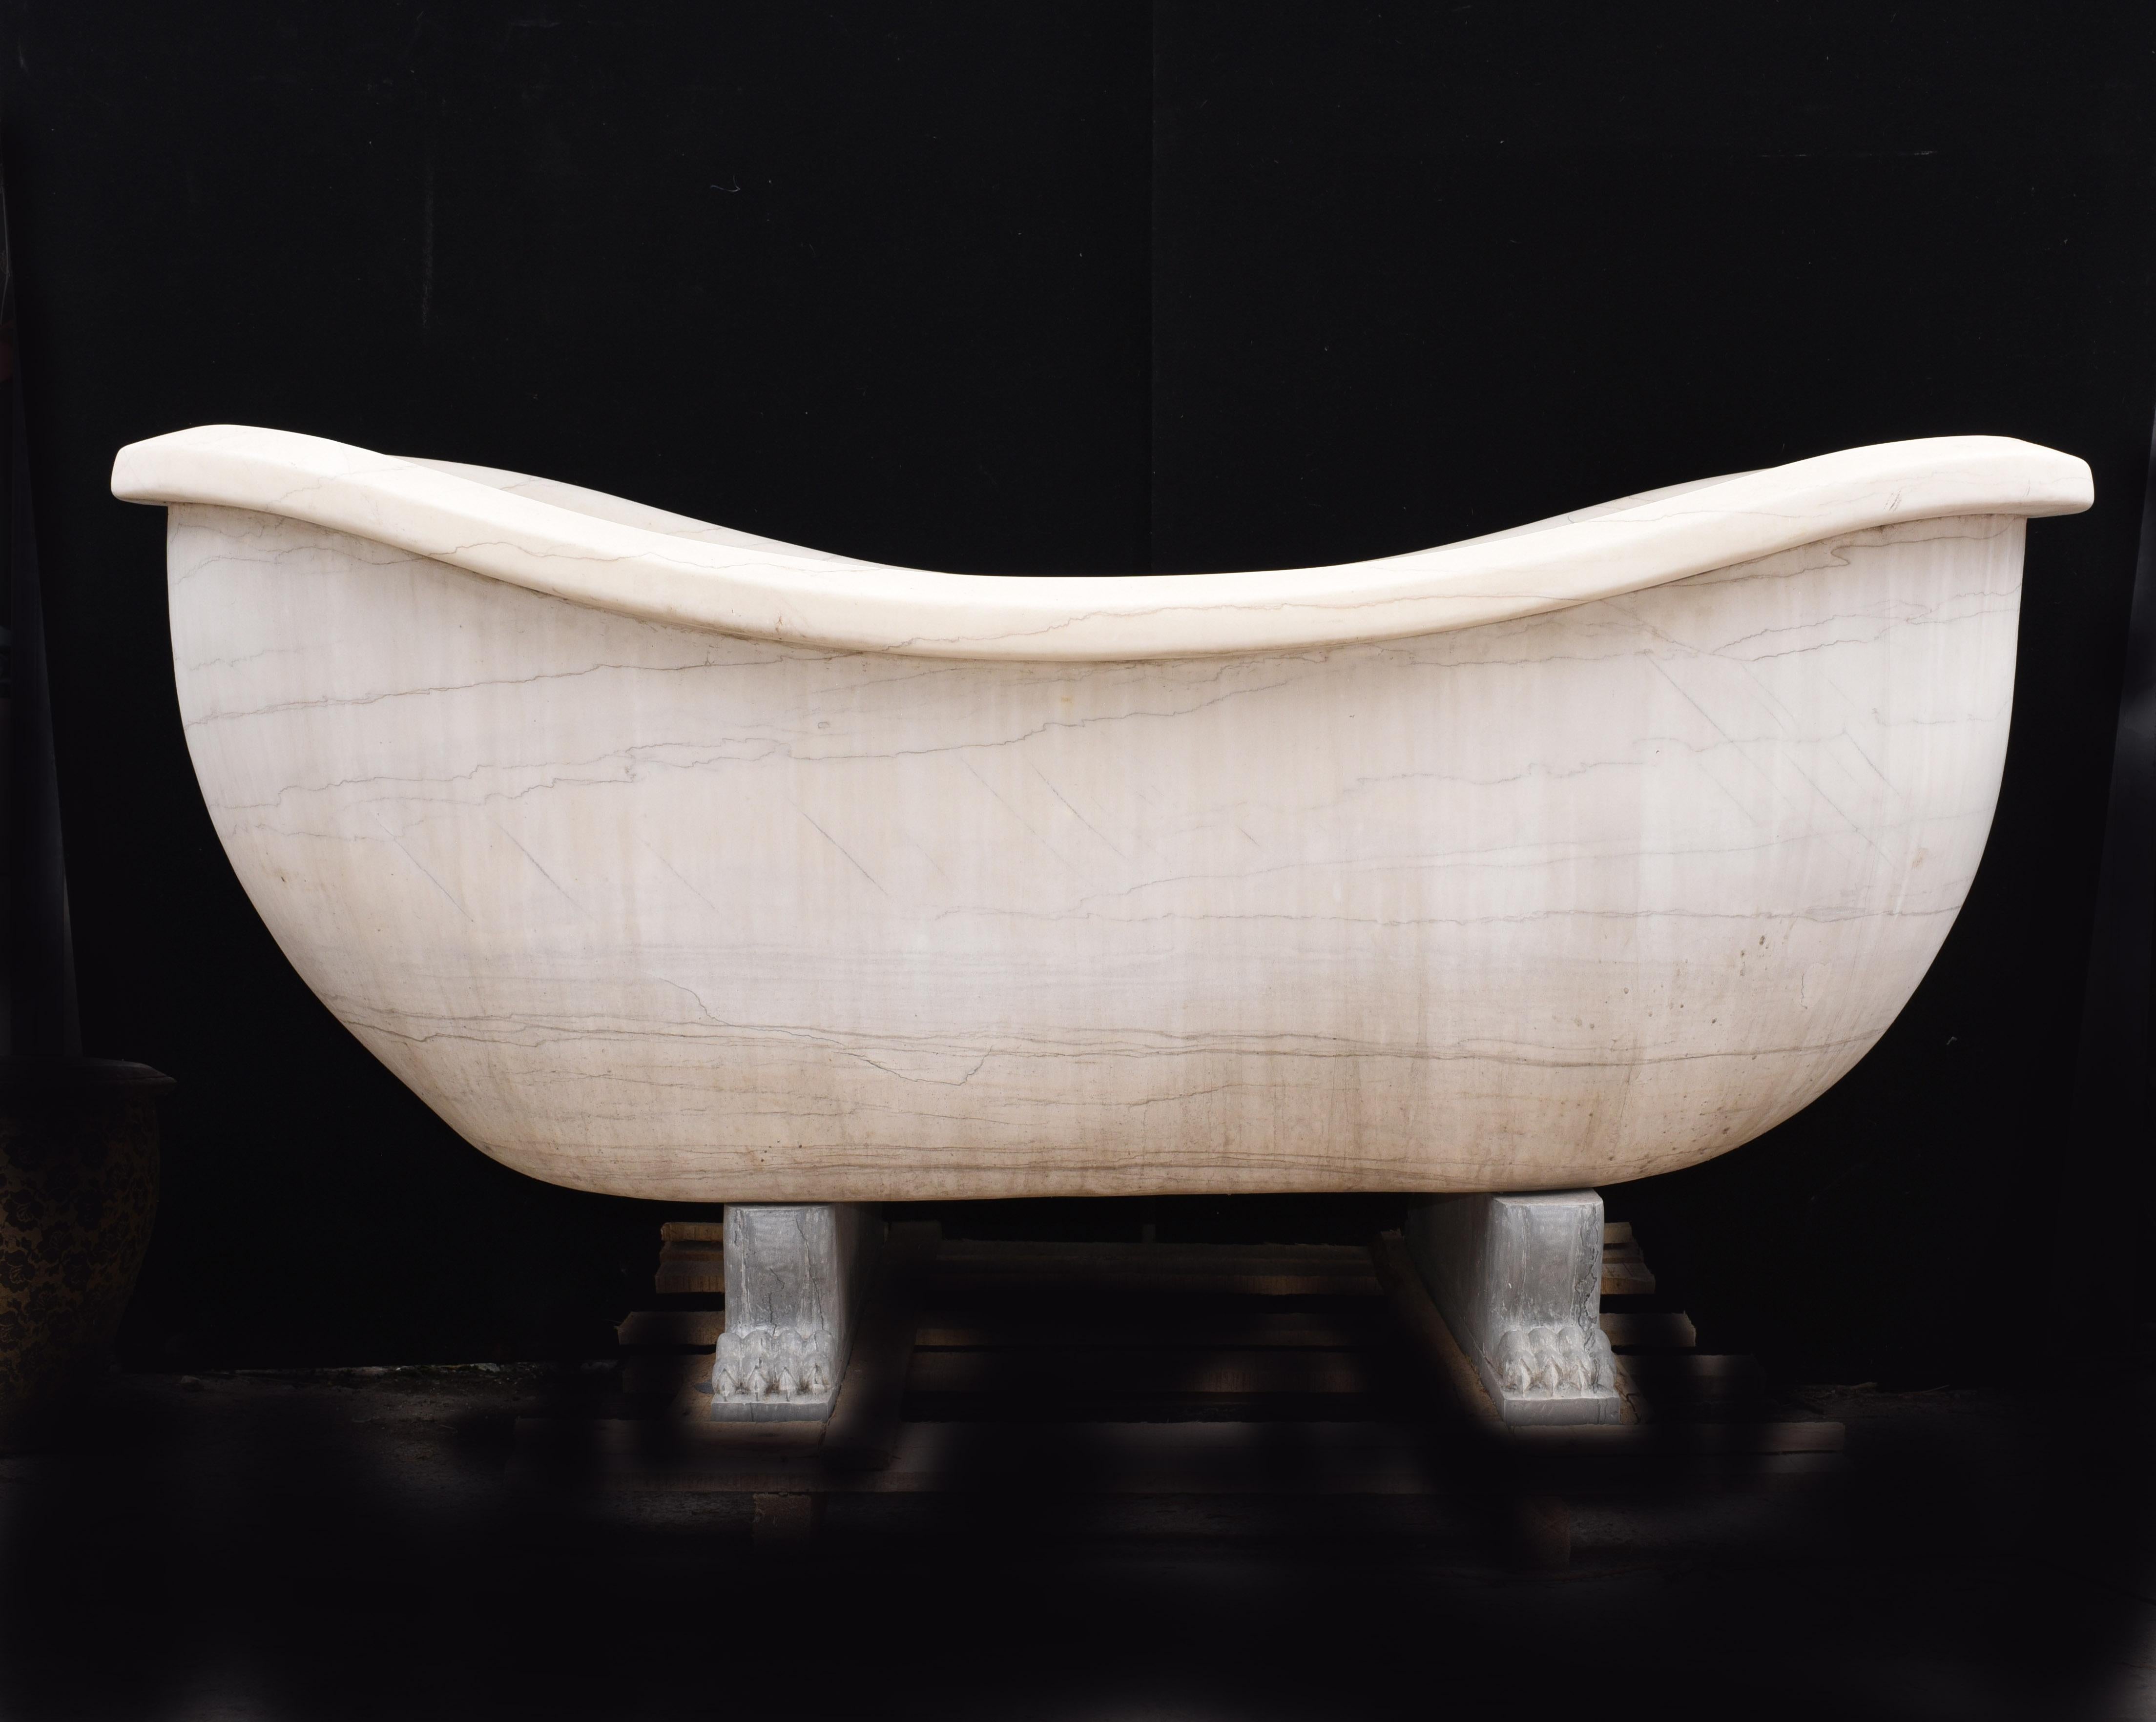 - Wonderful white carrara marble Roman bath tub
- Large piece at six feet head to toe - 185 CM
- Great to get this configured again as a bath, very deep and comfy to sit in
- Marble is smooth and chip free and this sits on black lions paw feet
-